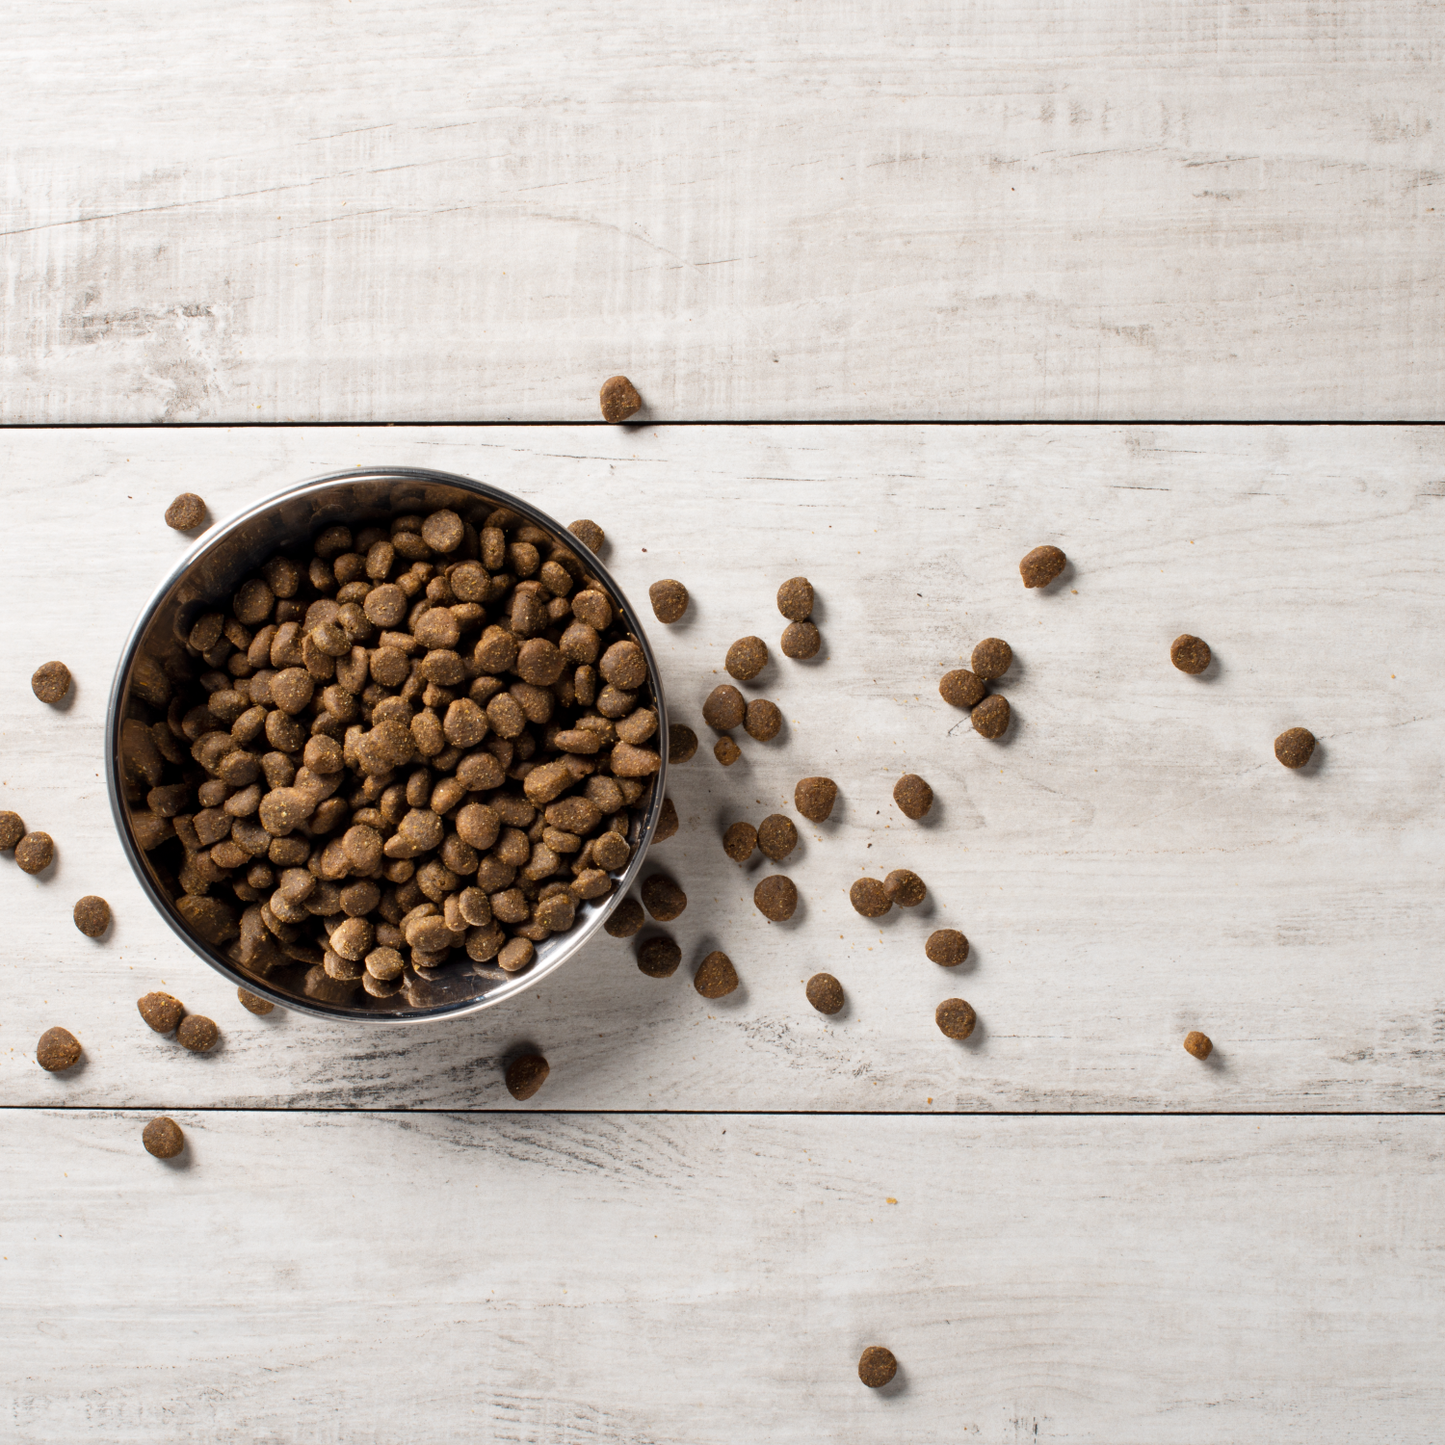 Turkey and salmon kibble in bowl and spilling onto wooden background